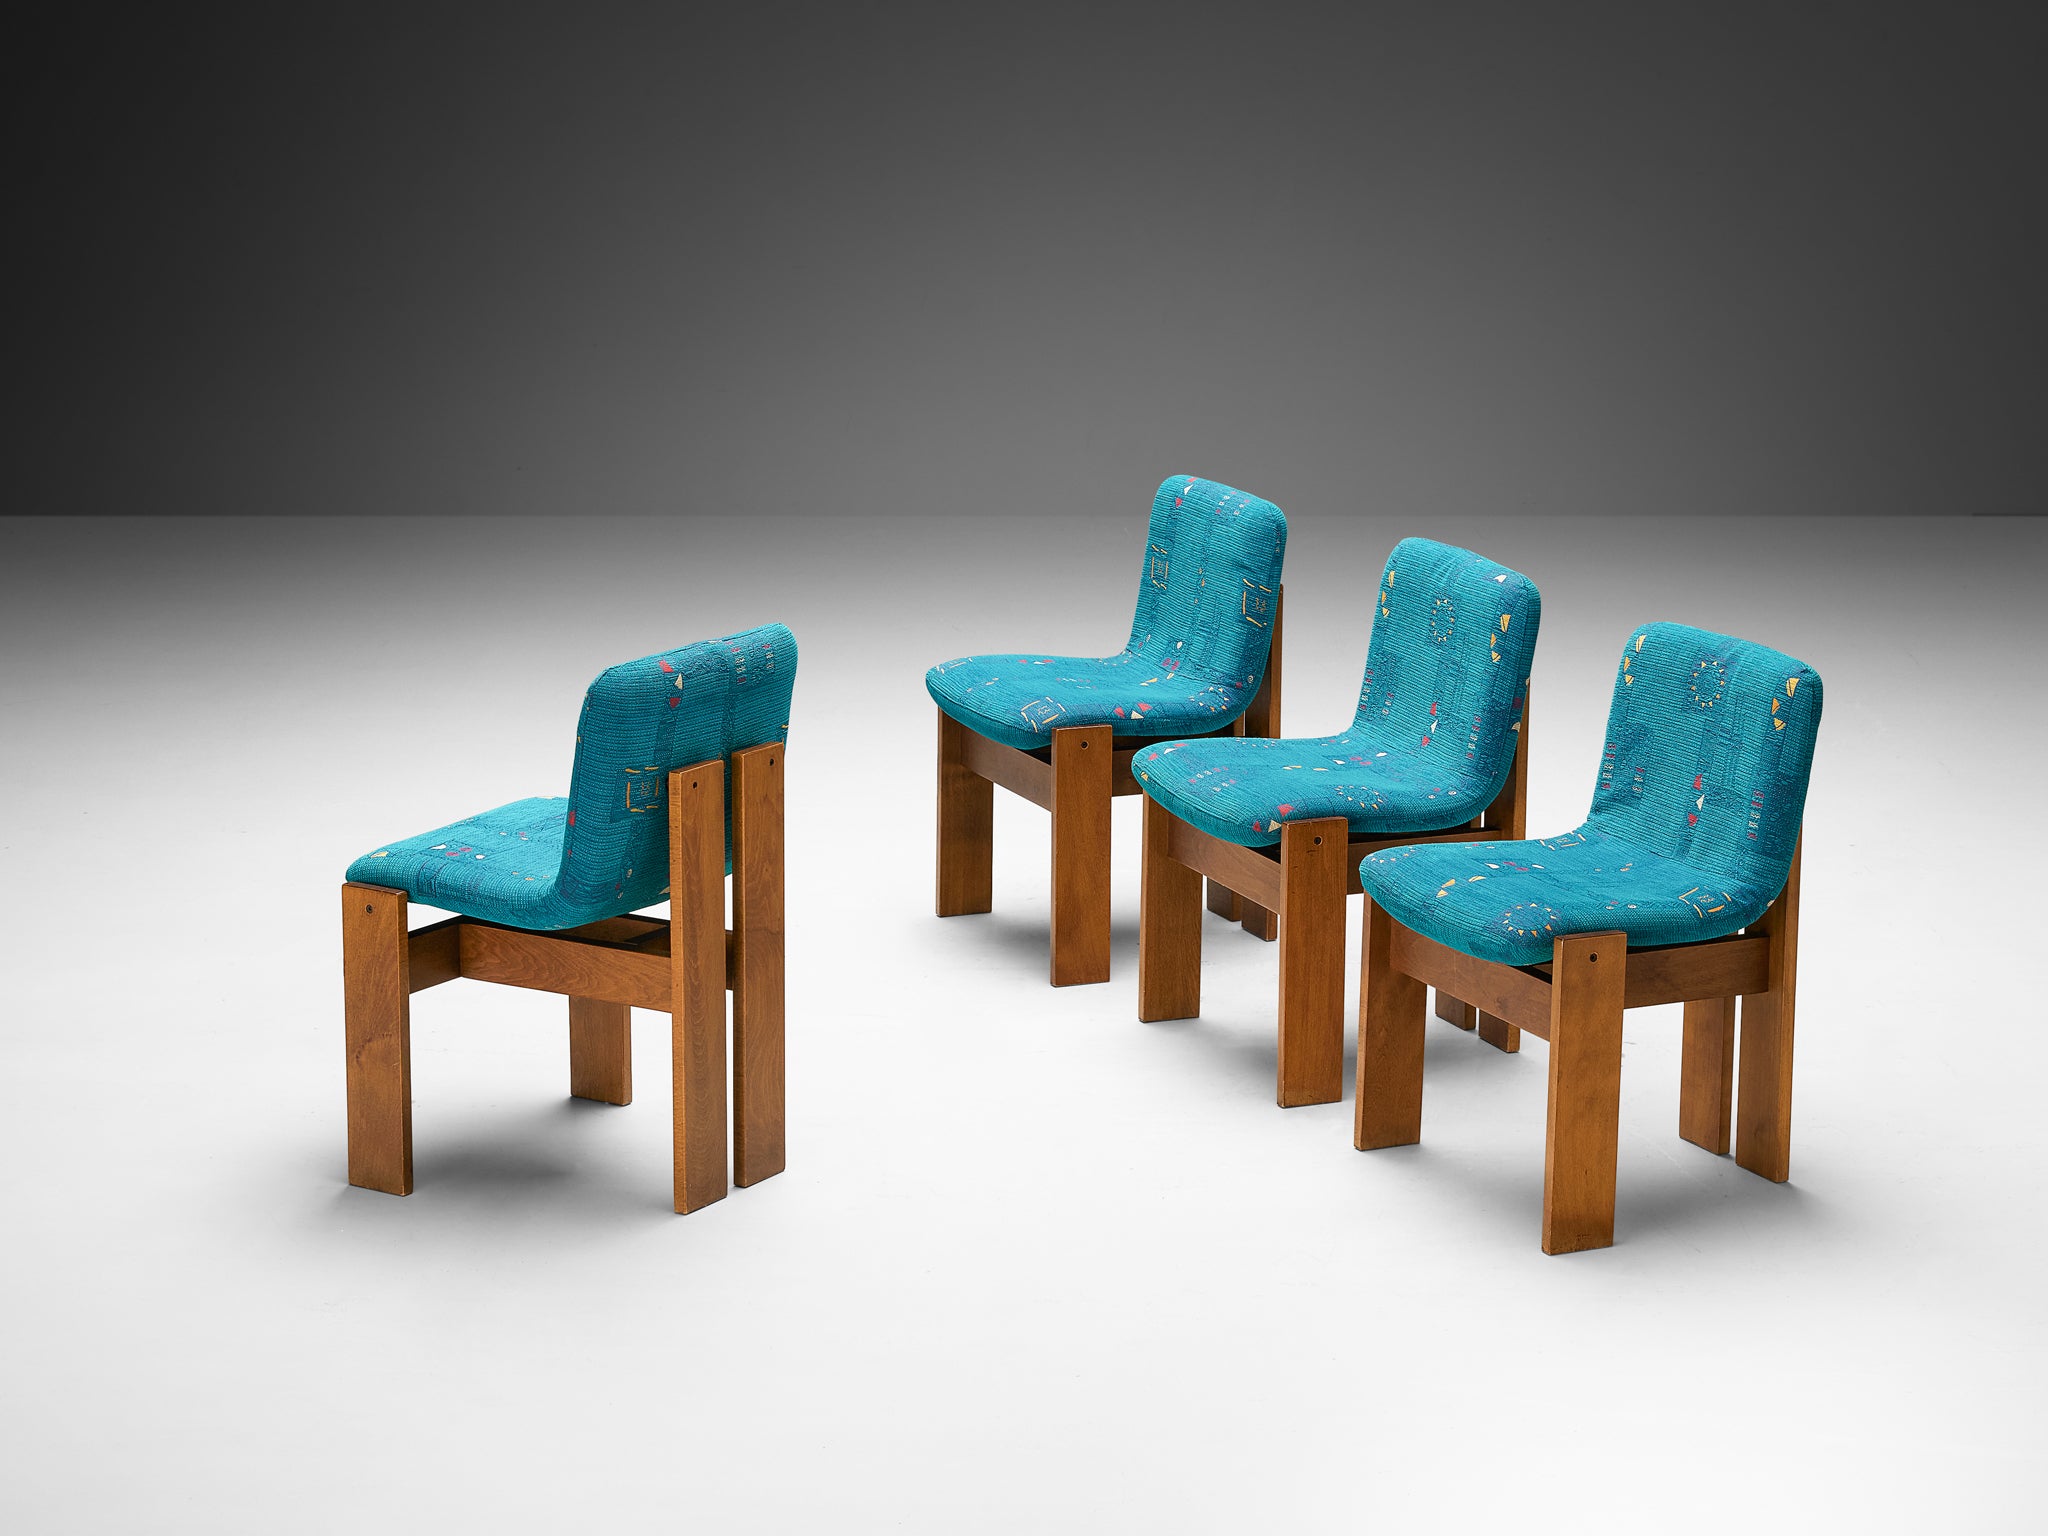 Set of Four Italian Dining Chairs in Wood and Turquoise Upholstery